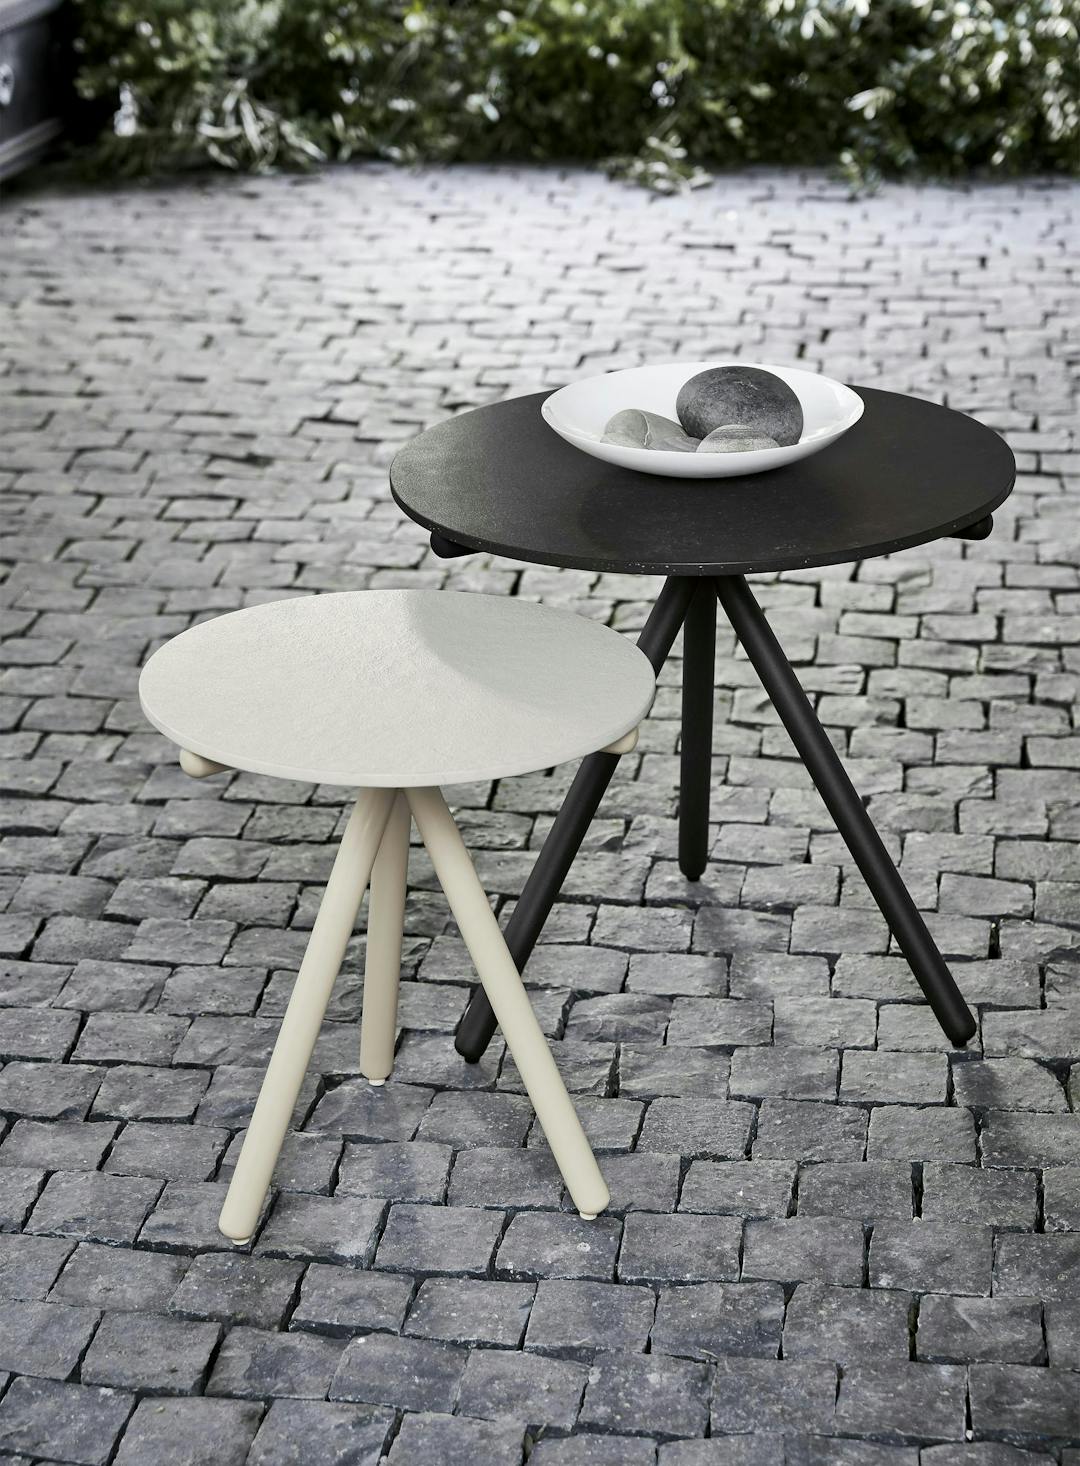 One tall side table in black finish and a shorter side table in white finish. Oscar was designed by Ann Marie Vering.